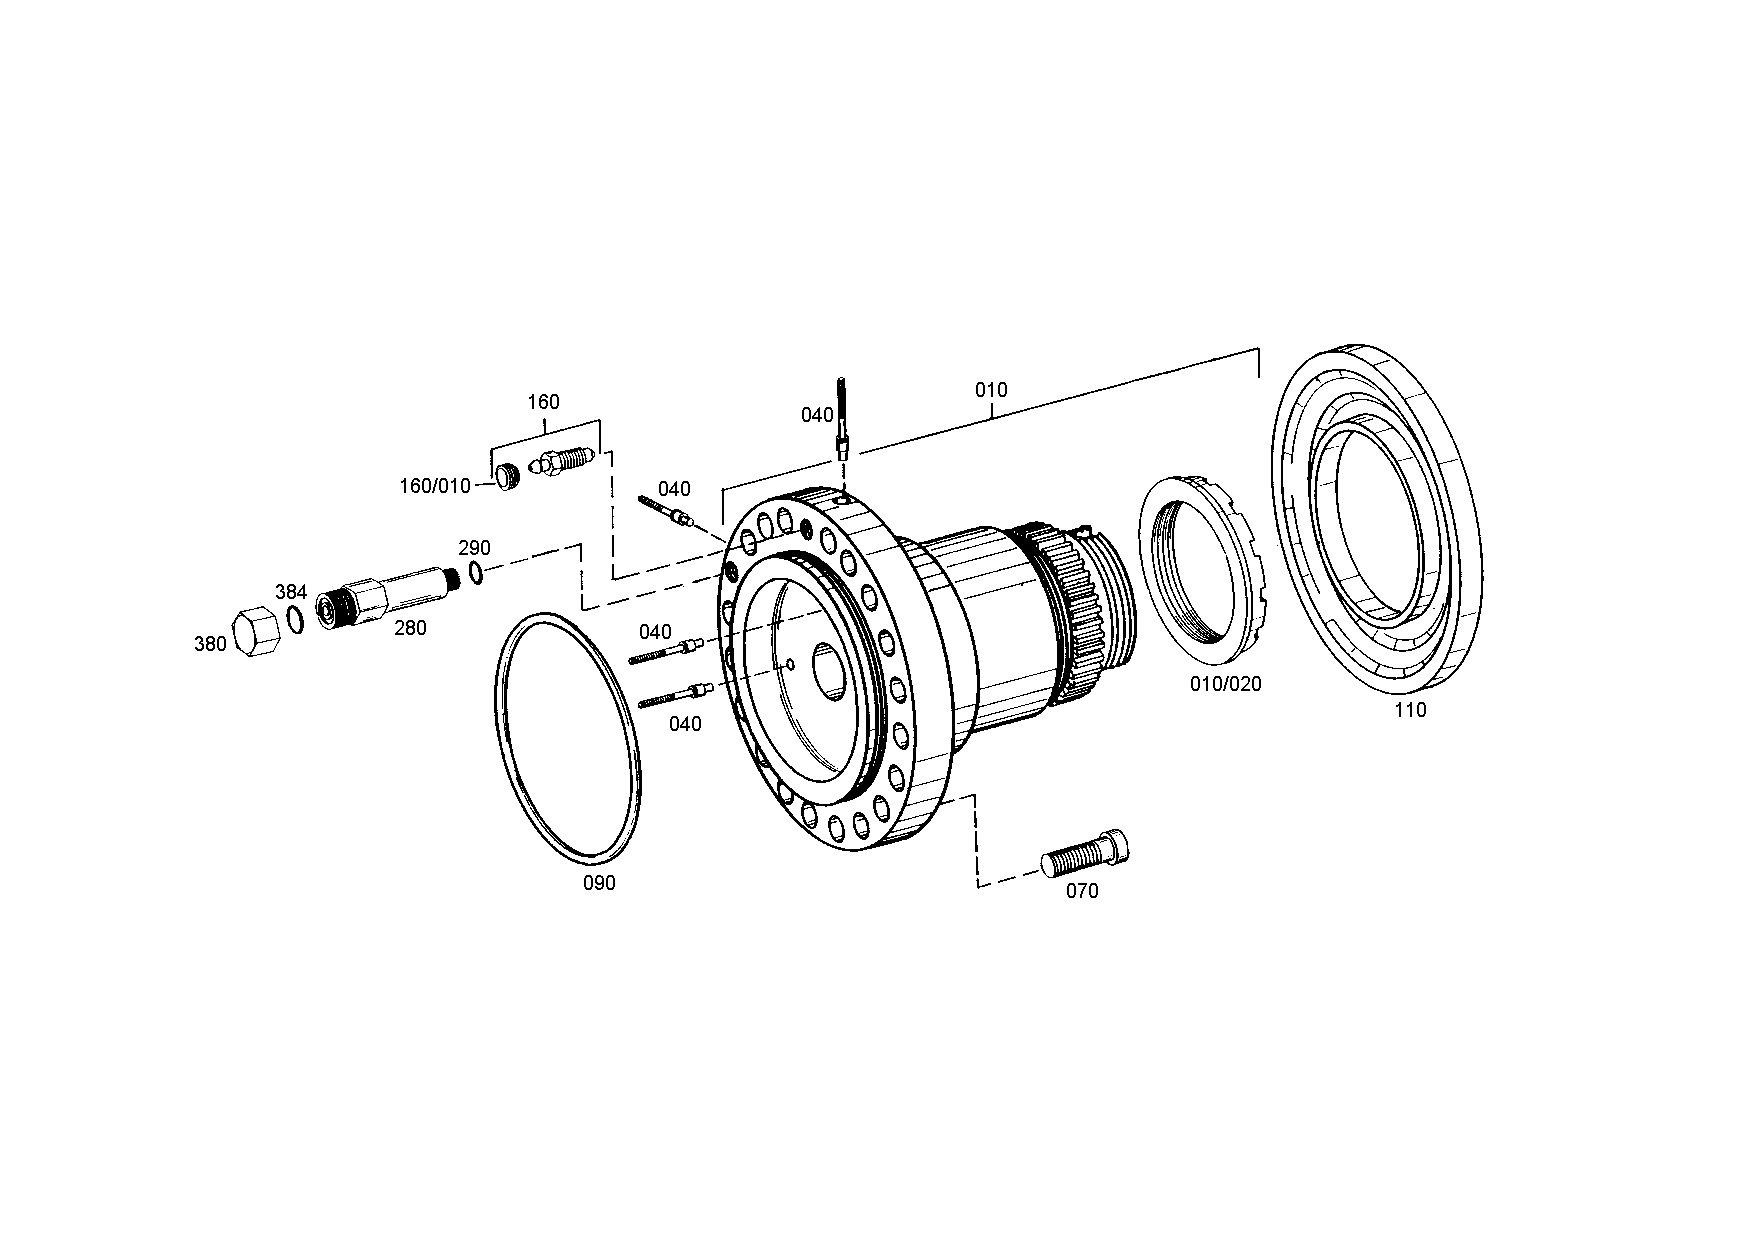 drawing for CATERPILLAR INC. 006137 - SUPPORT PLATE (figure 3)